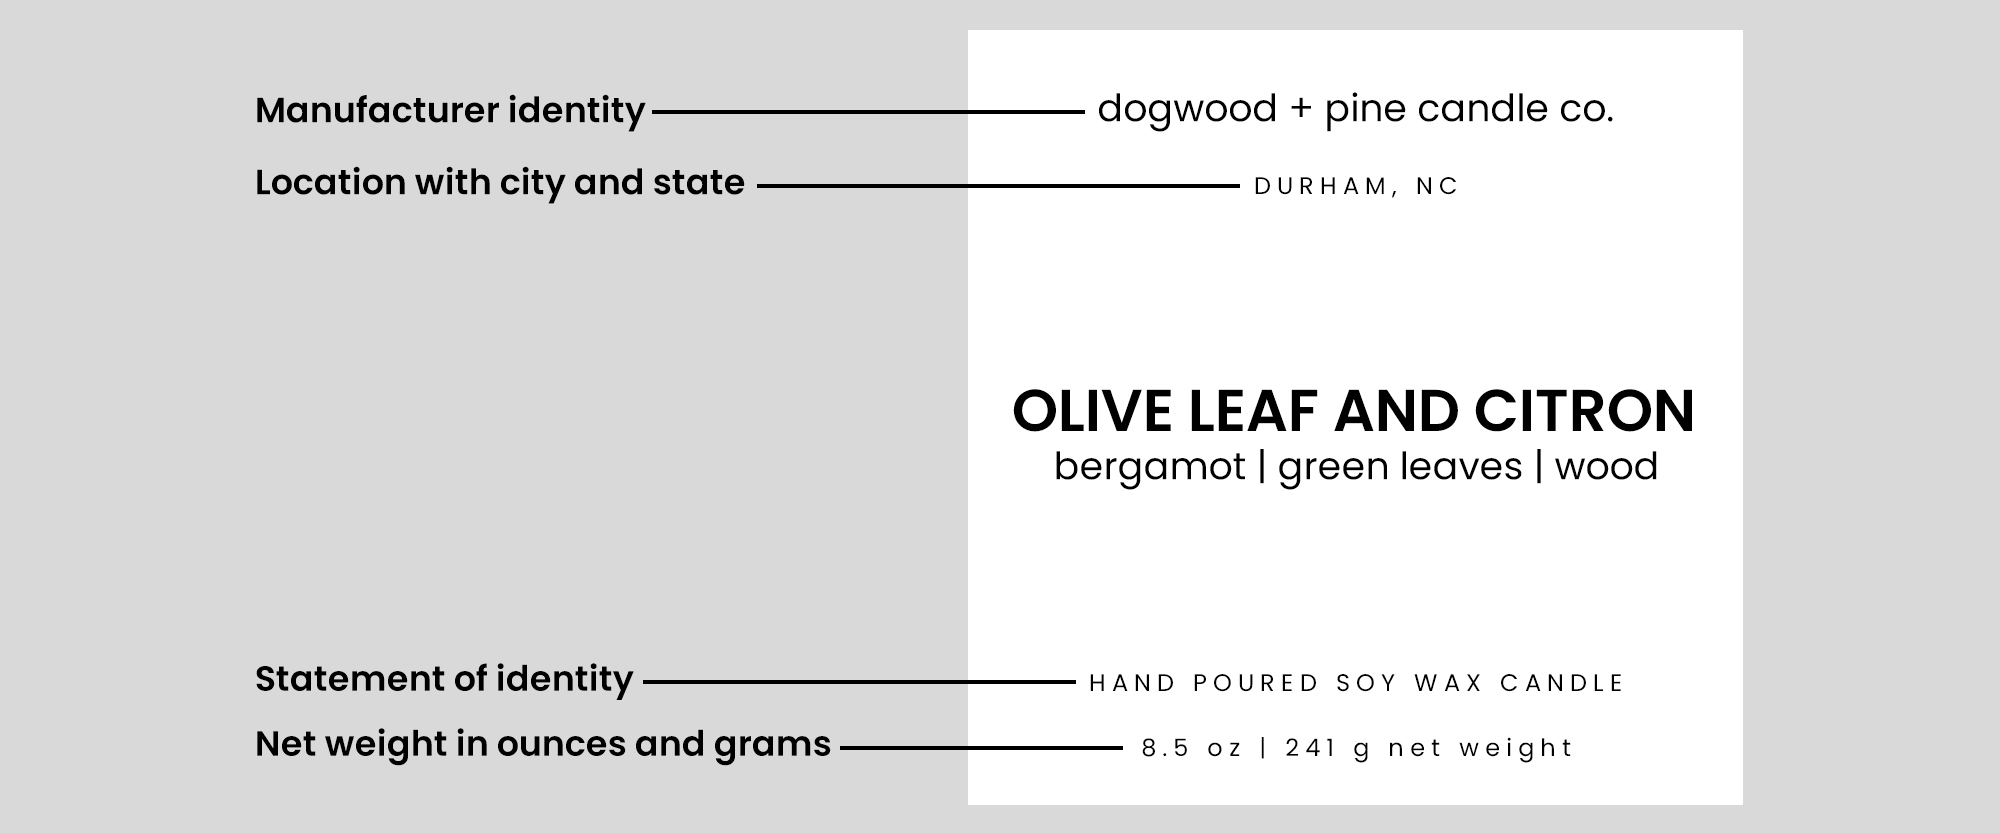 A graphic of a diagrammed primary candle label displaying manufacturer identity, location with city and state, statement of identity, and net weight in ounces and grams